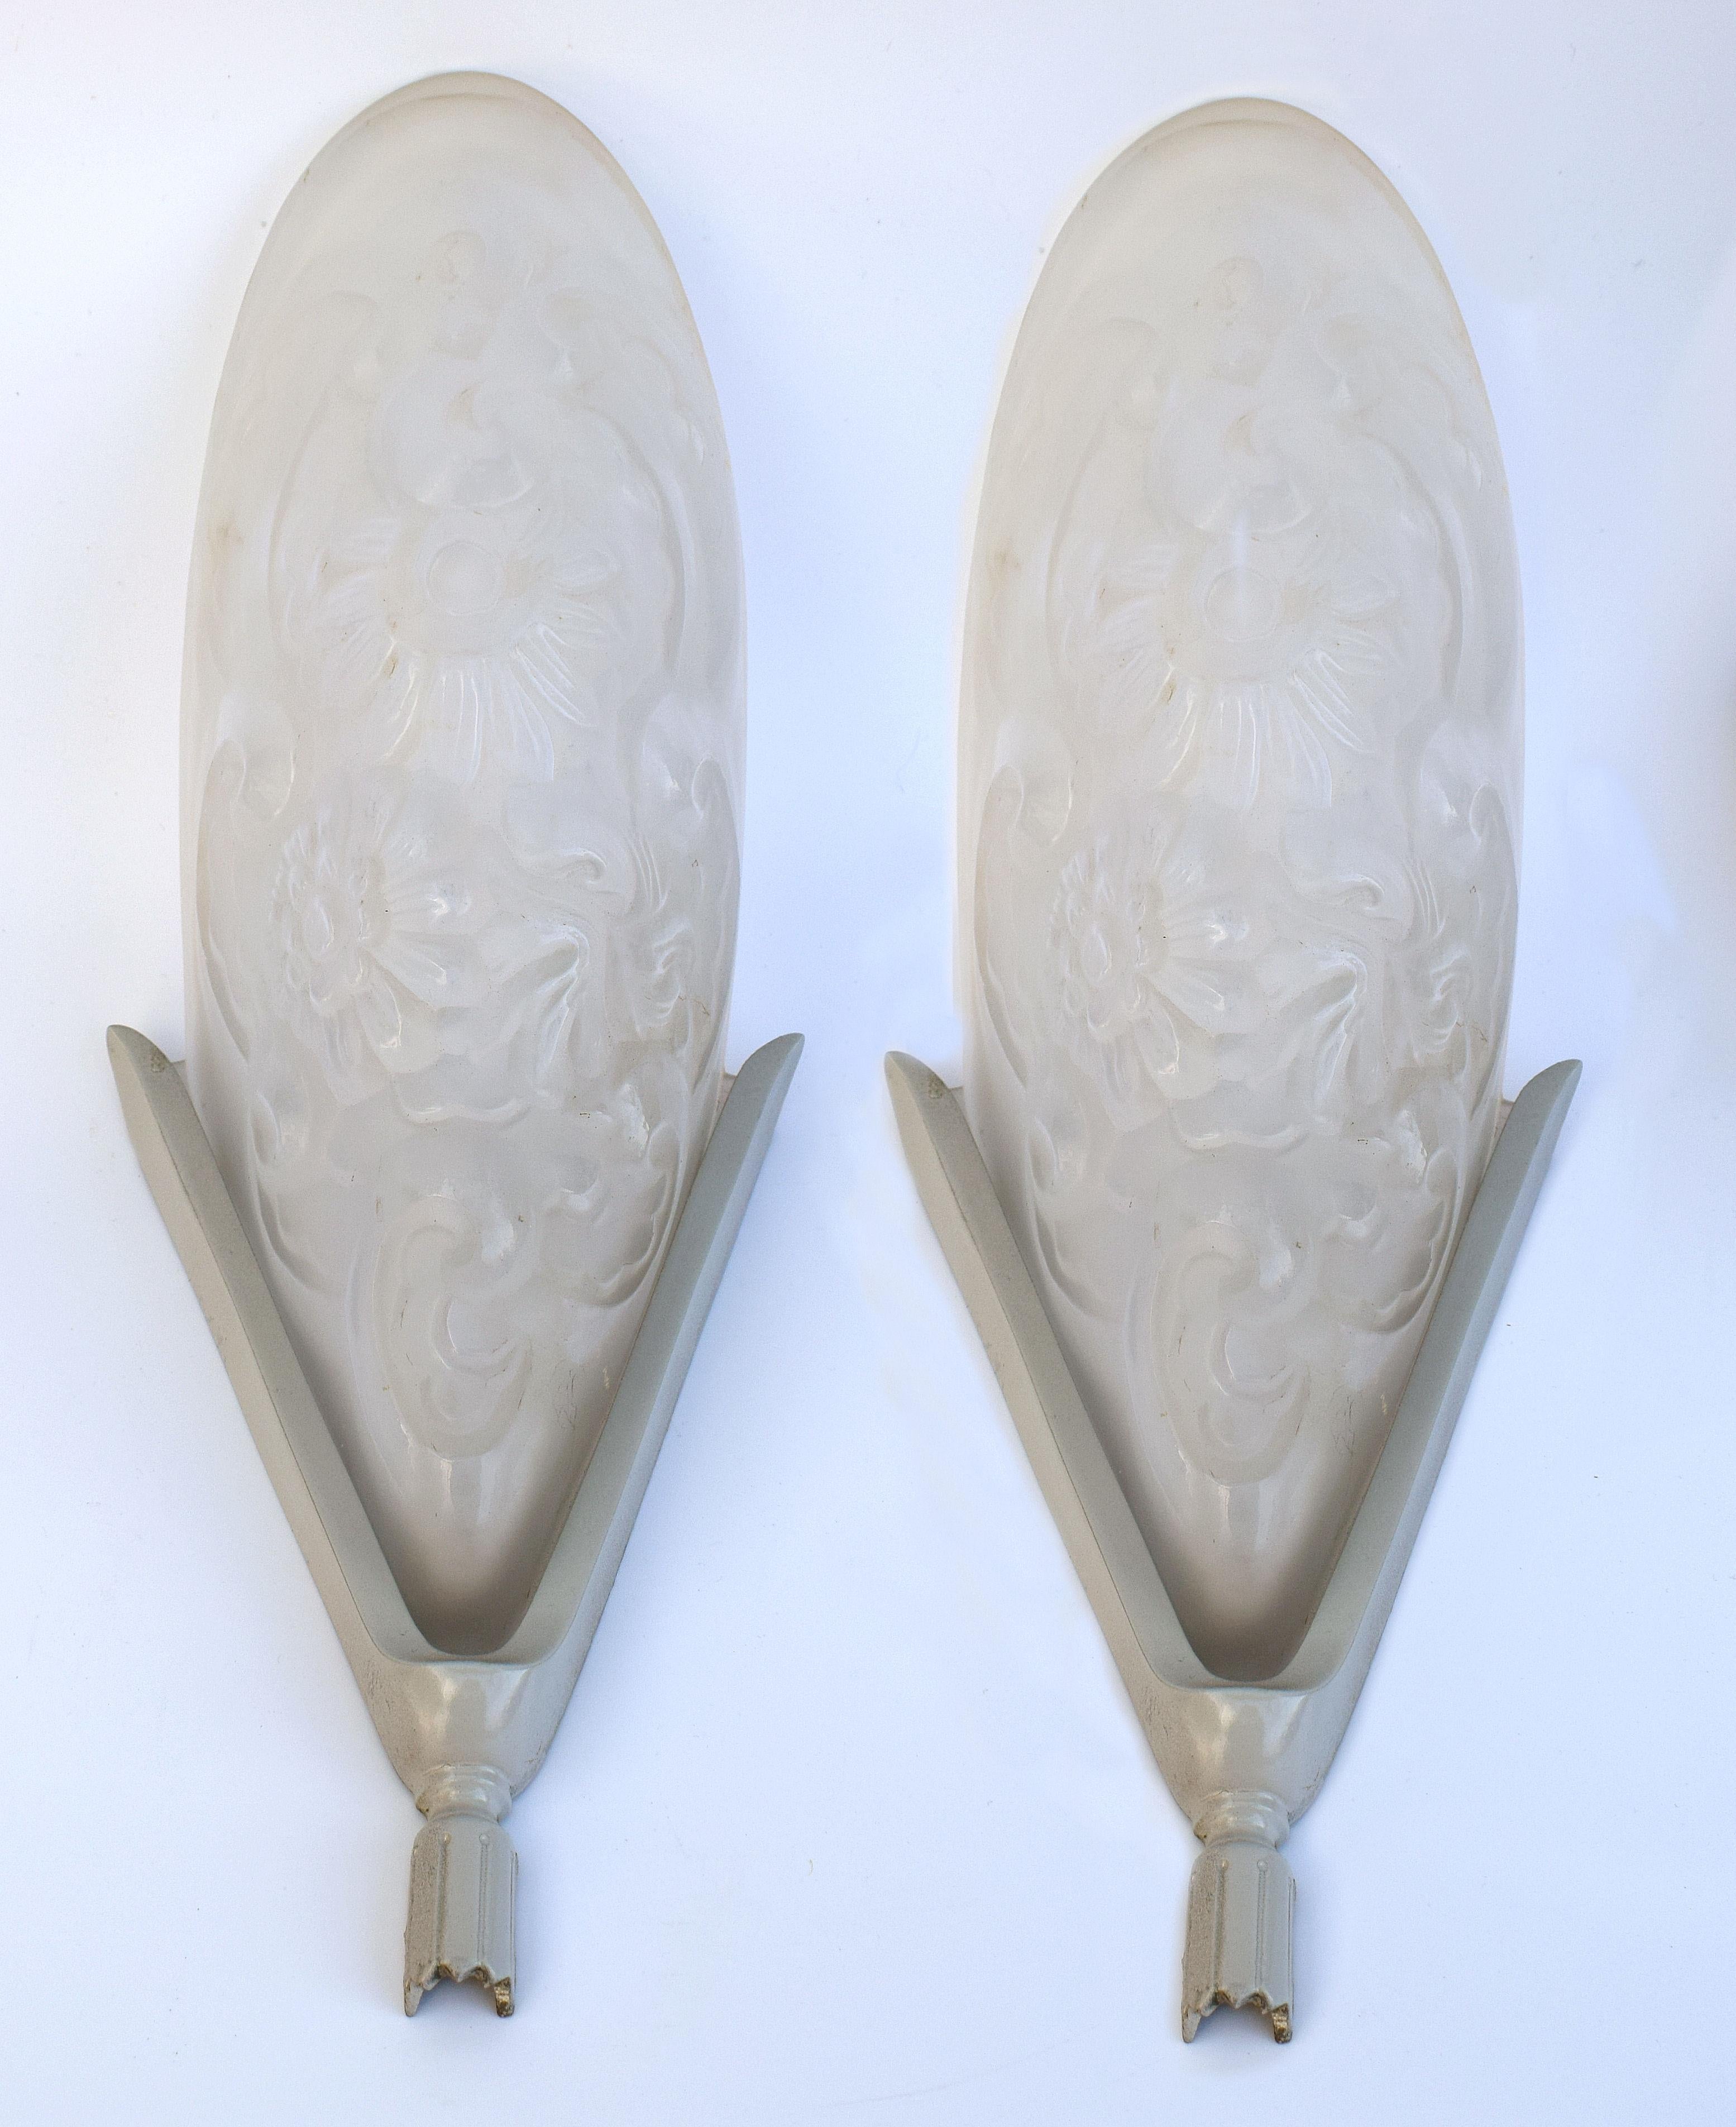 1930s French Art Deco Matching Pair of Wall Light Sconces For Sale 3